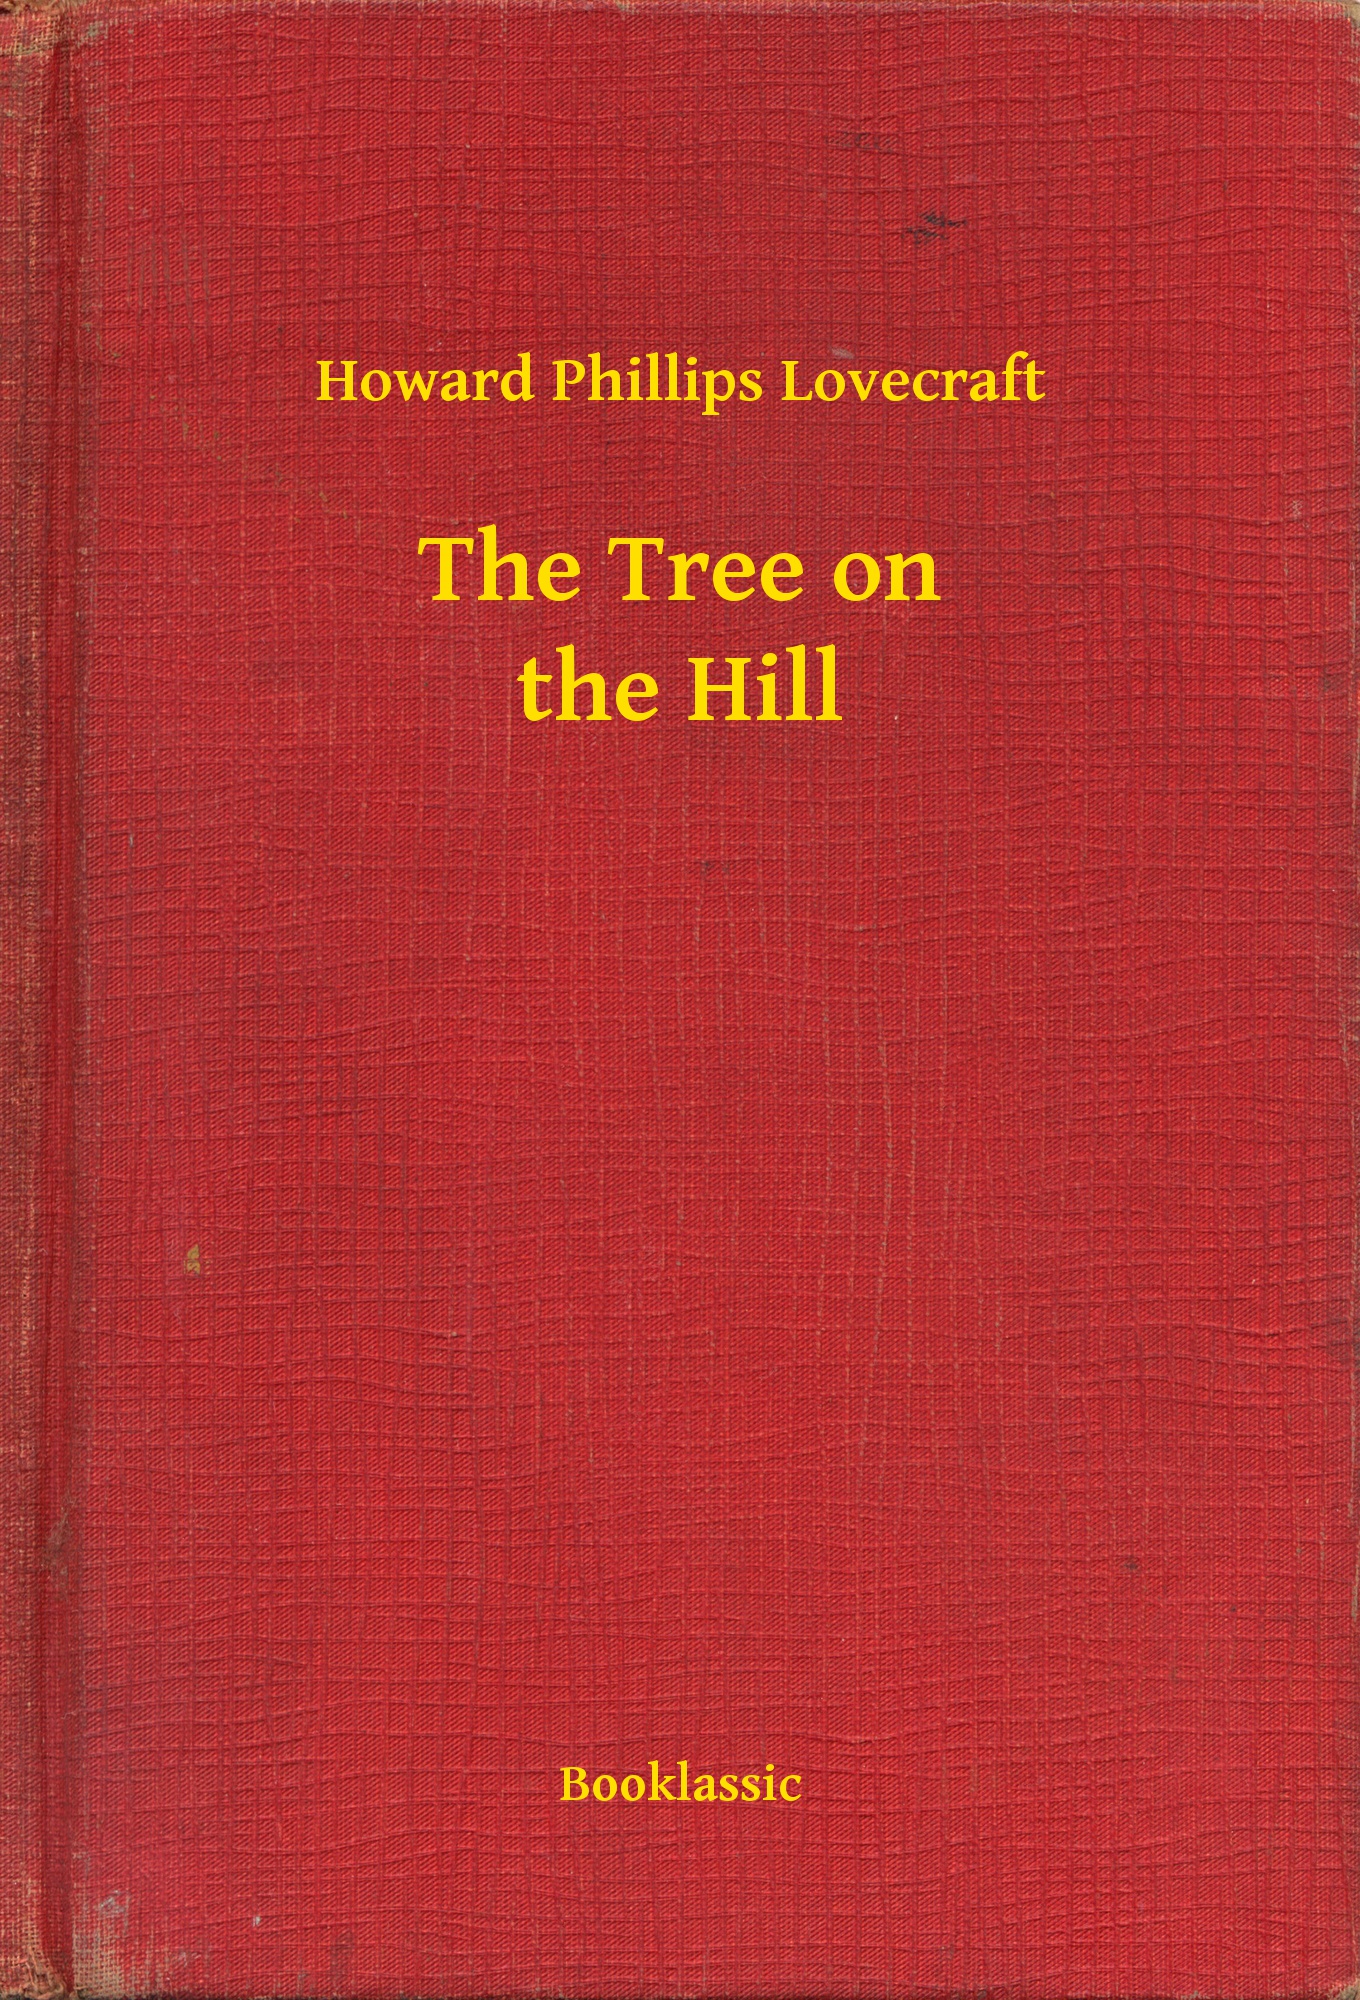 The Tree on the Hill